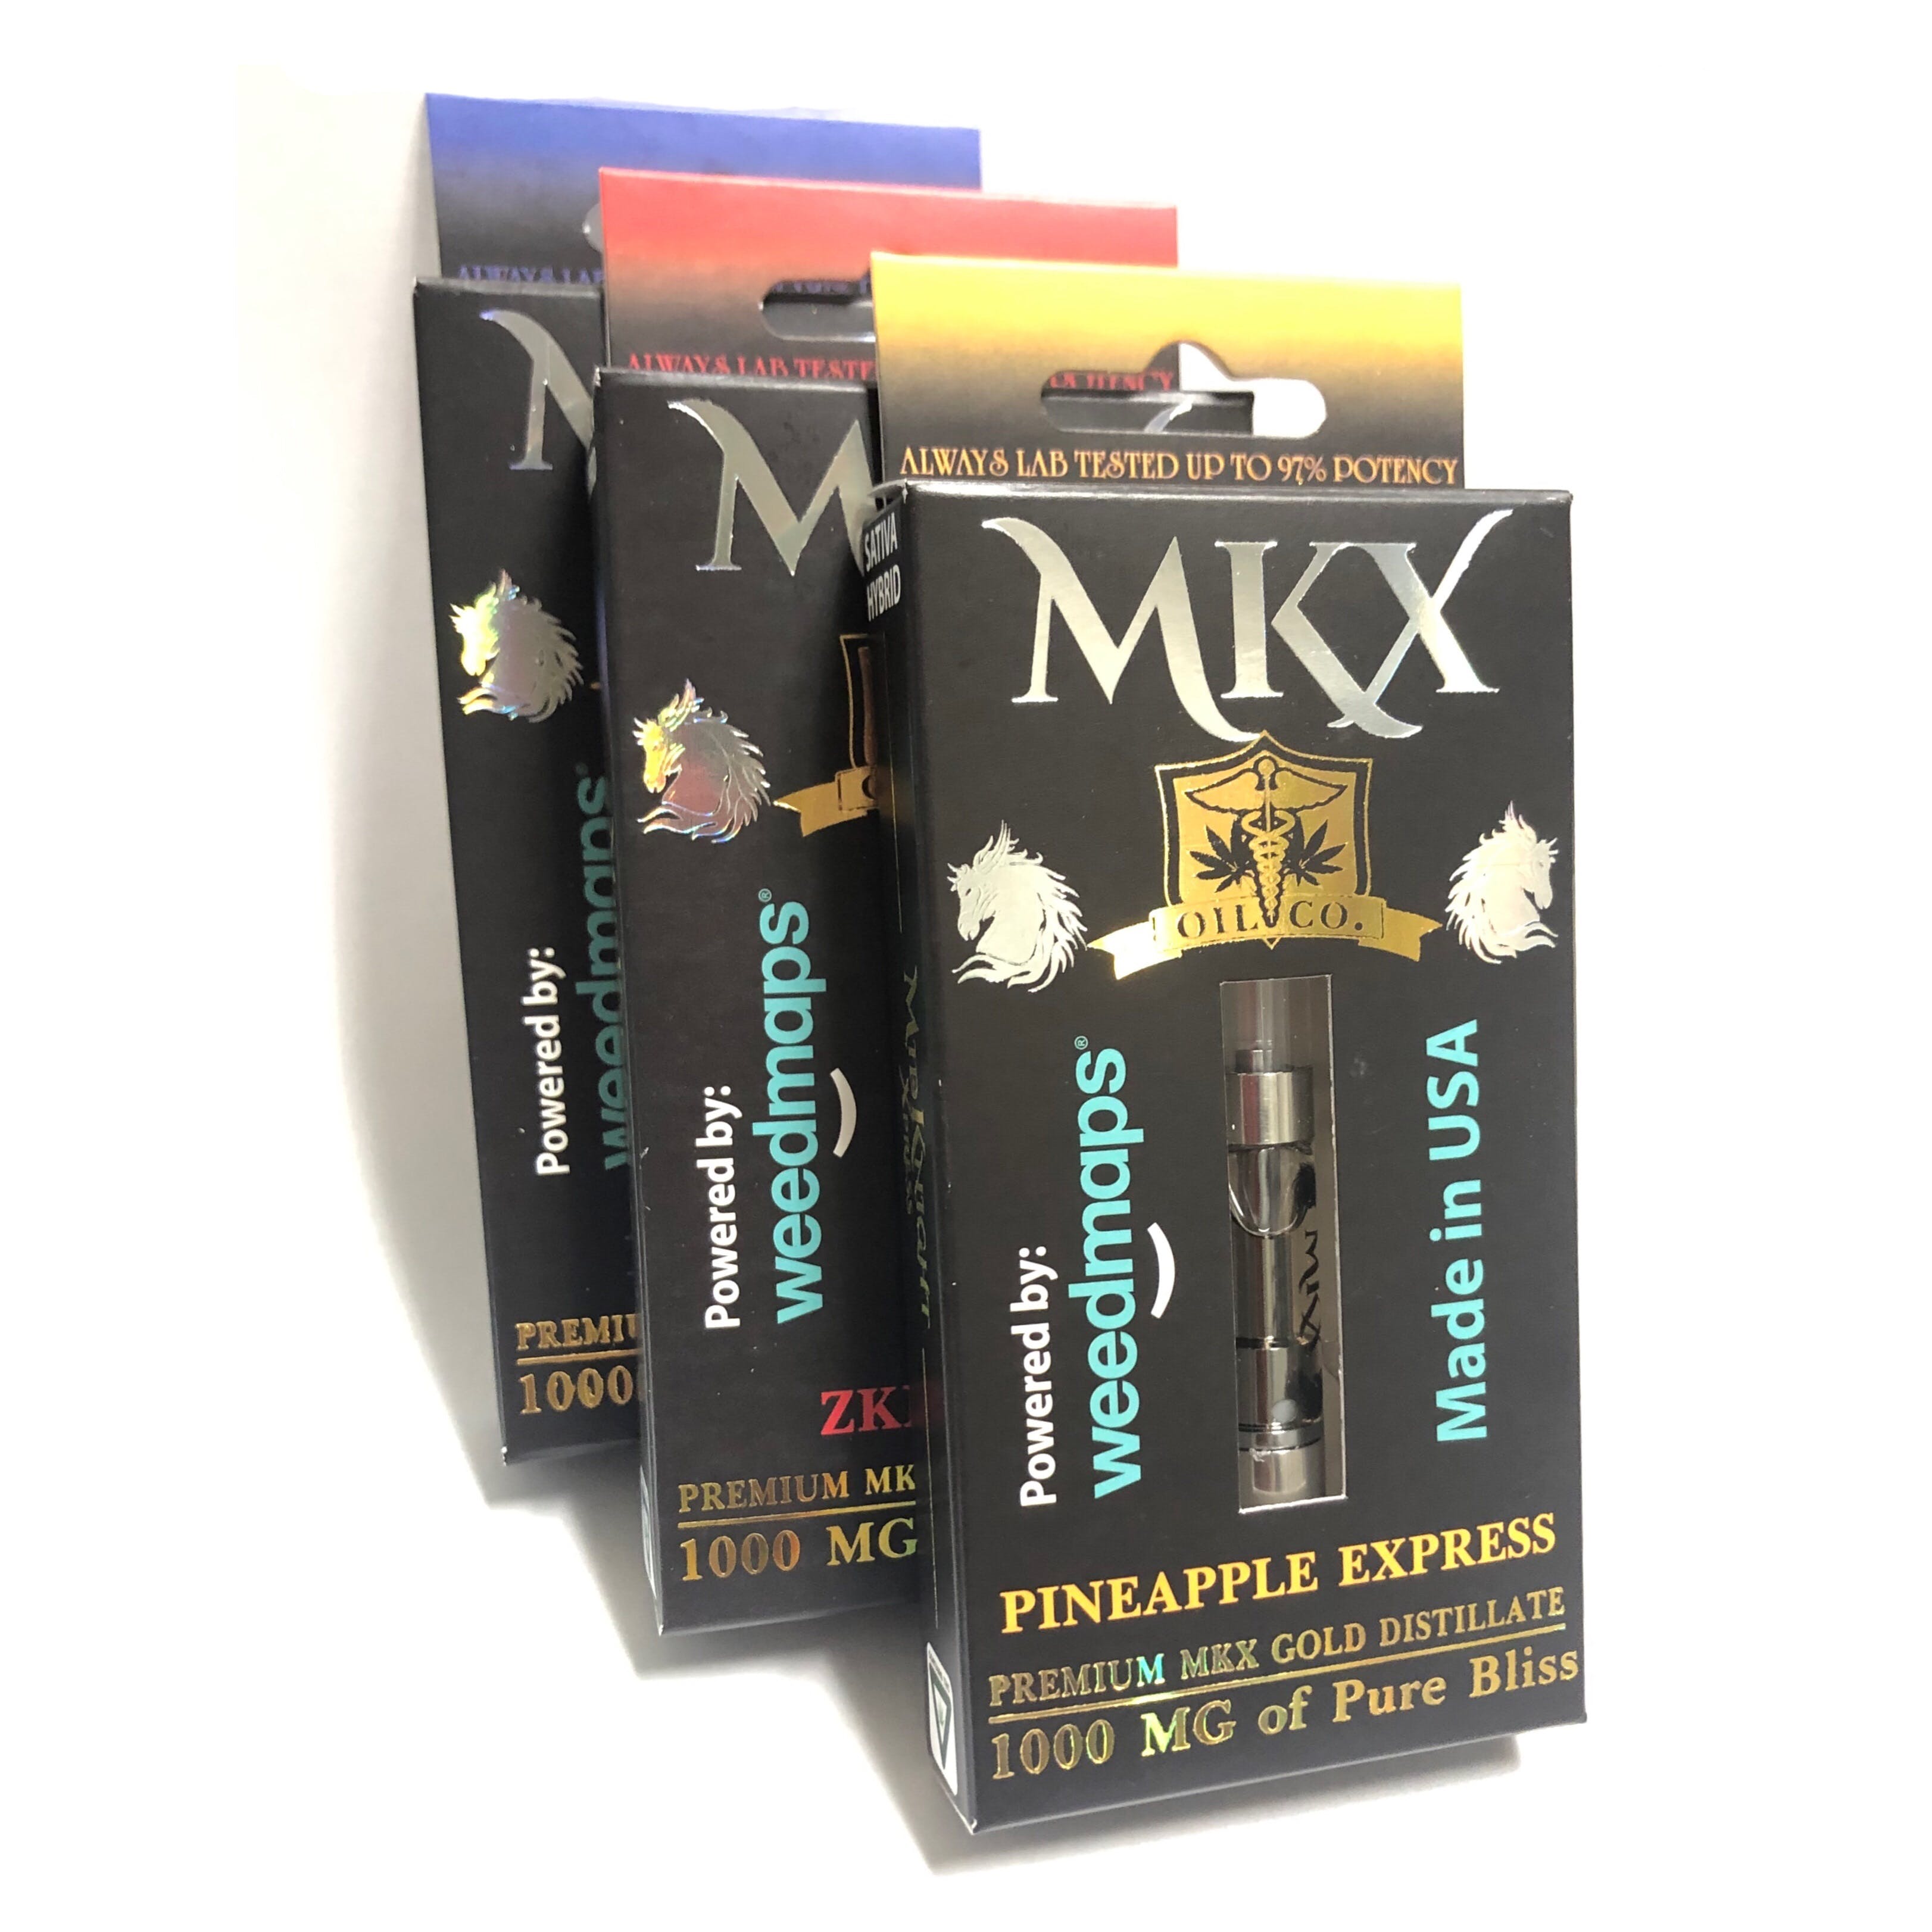 concentrate-midknight-xpress-carts-1-gram-4-24130